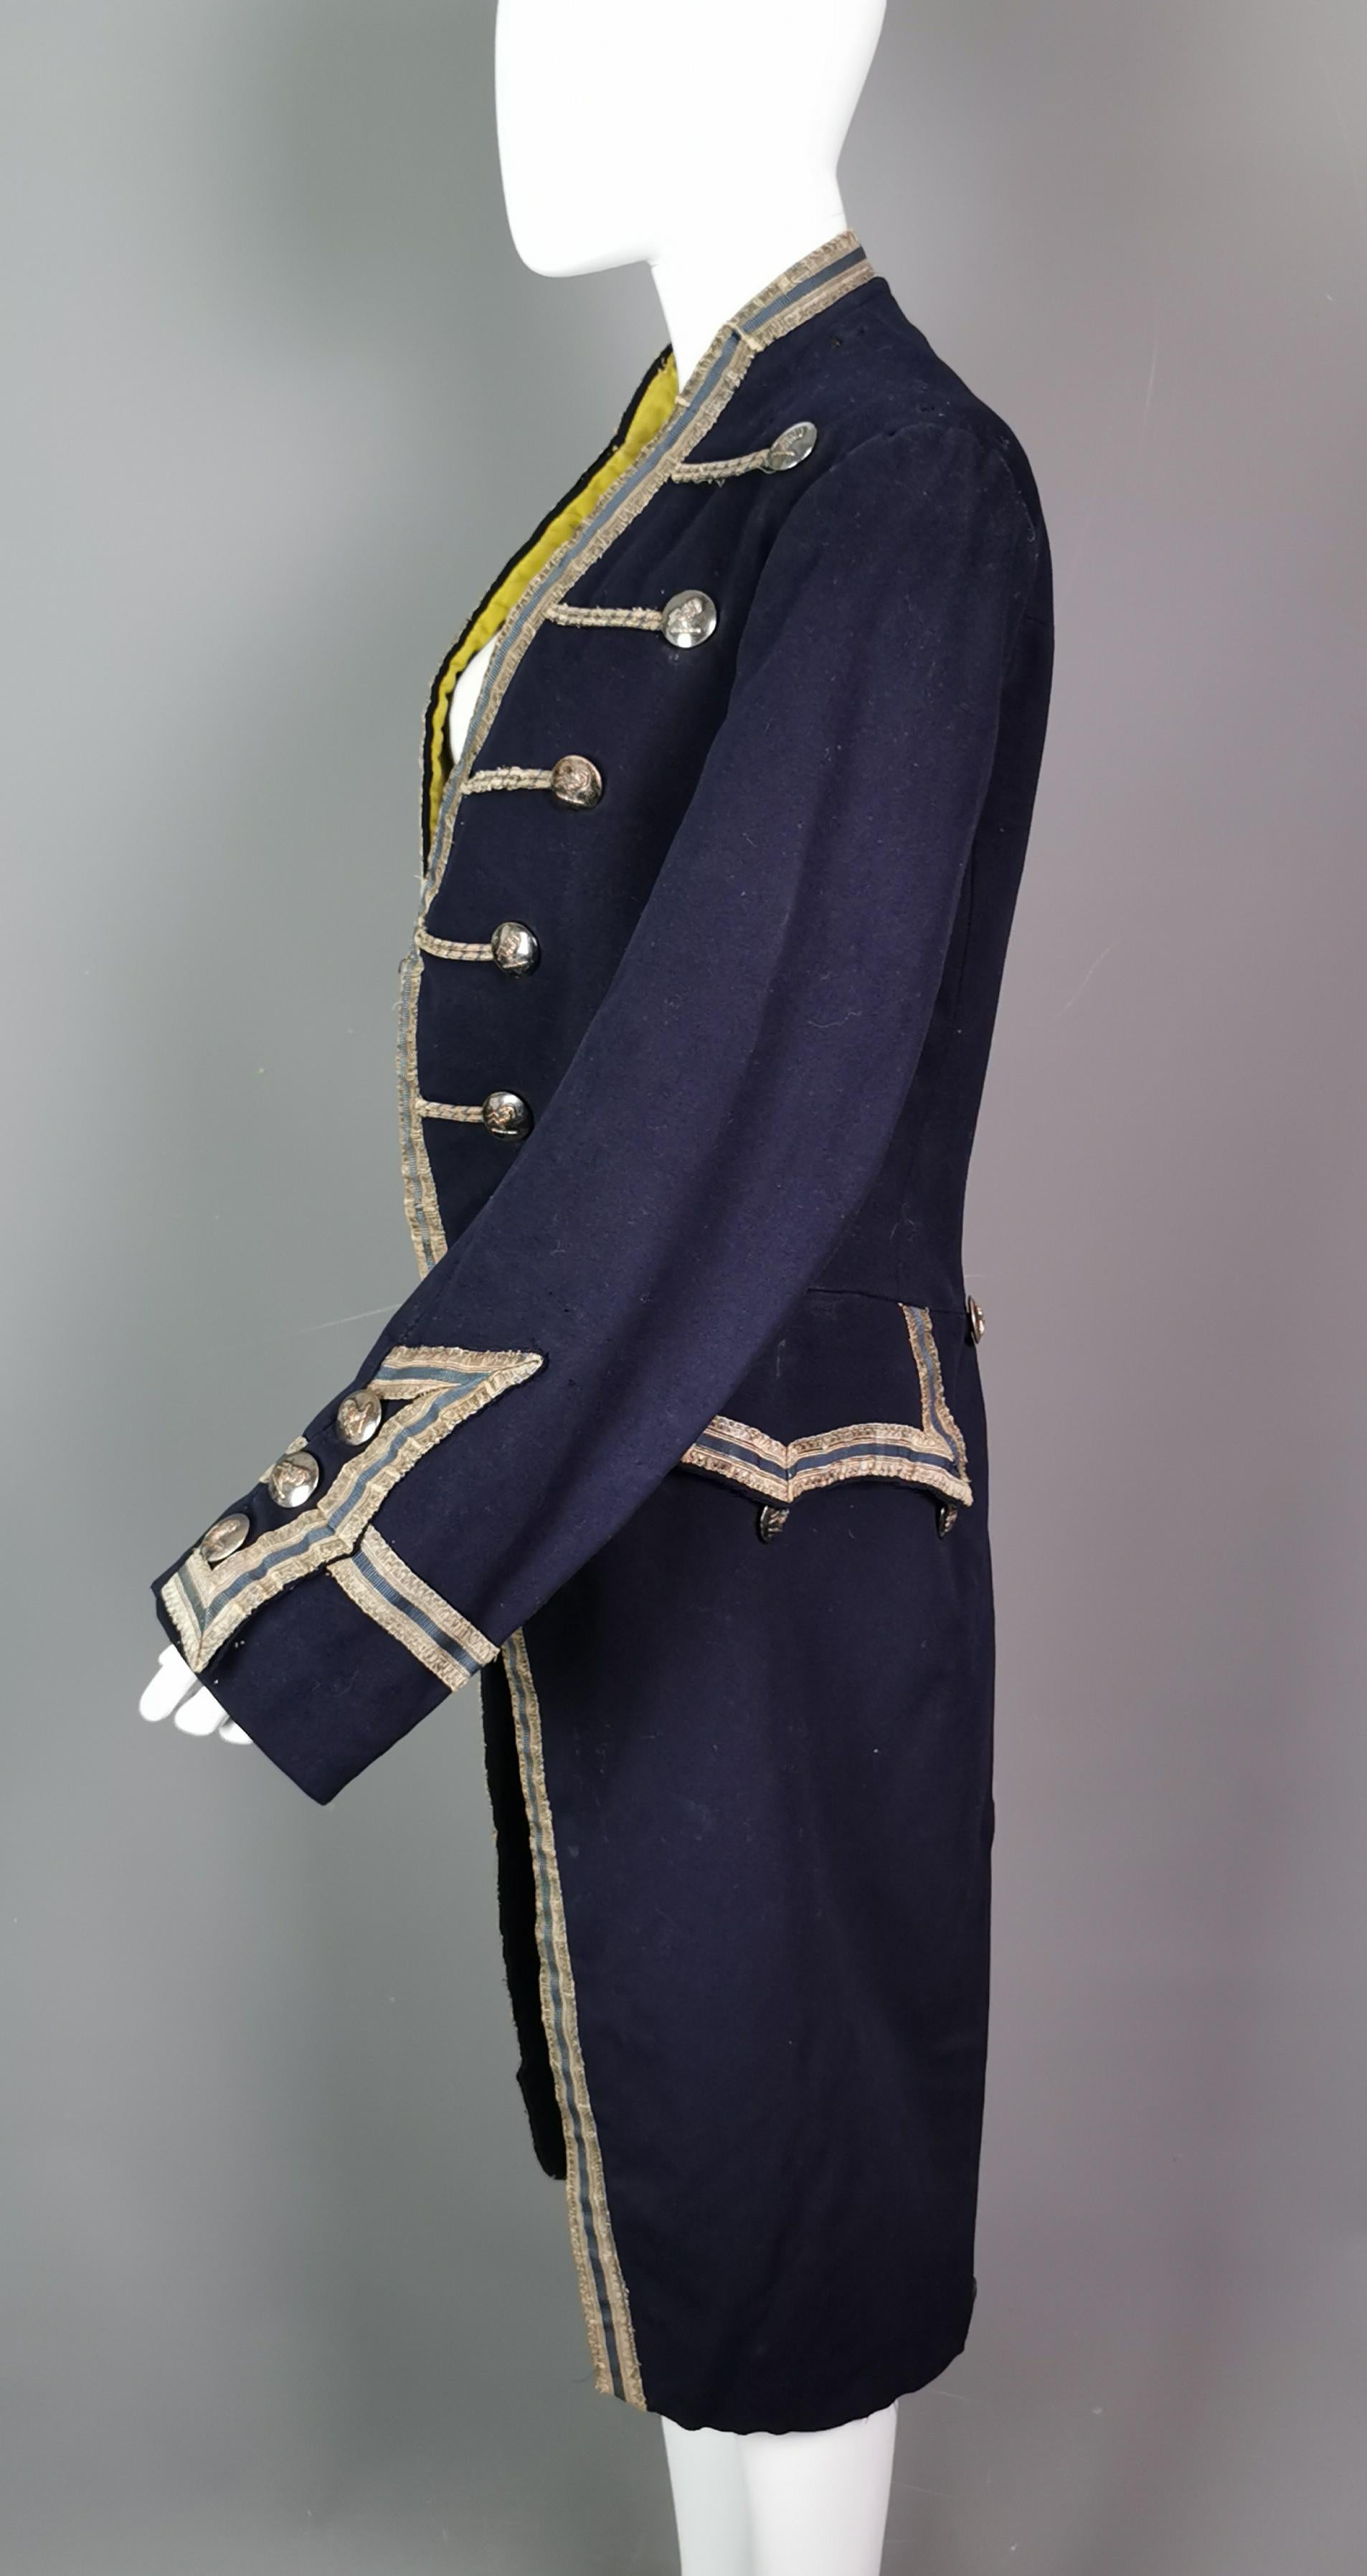 Antique theatrical costume, 18th century military style frock coat, Edwardian  1